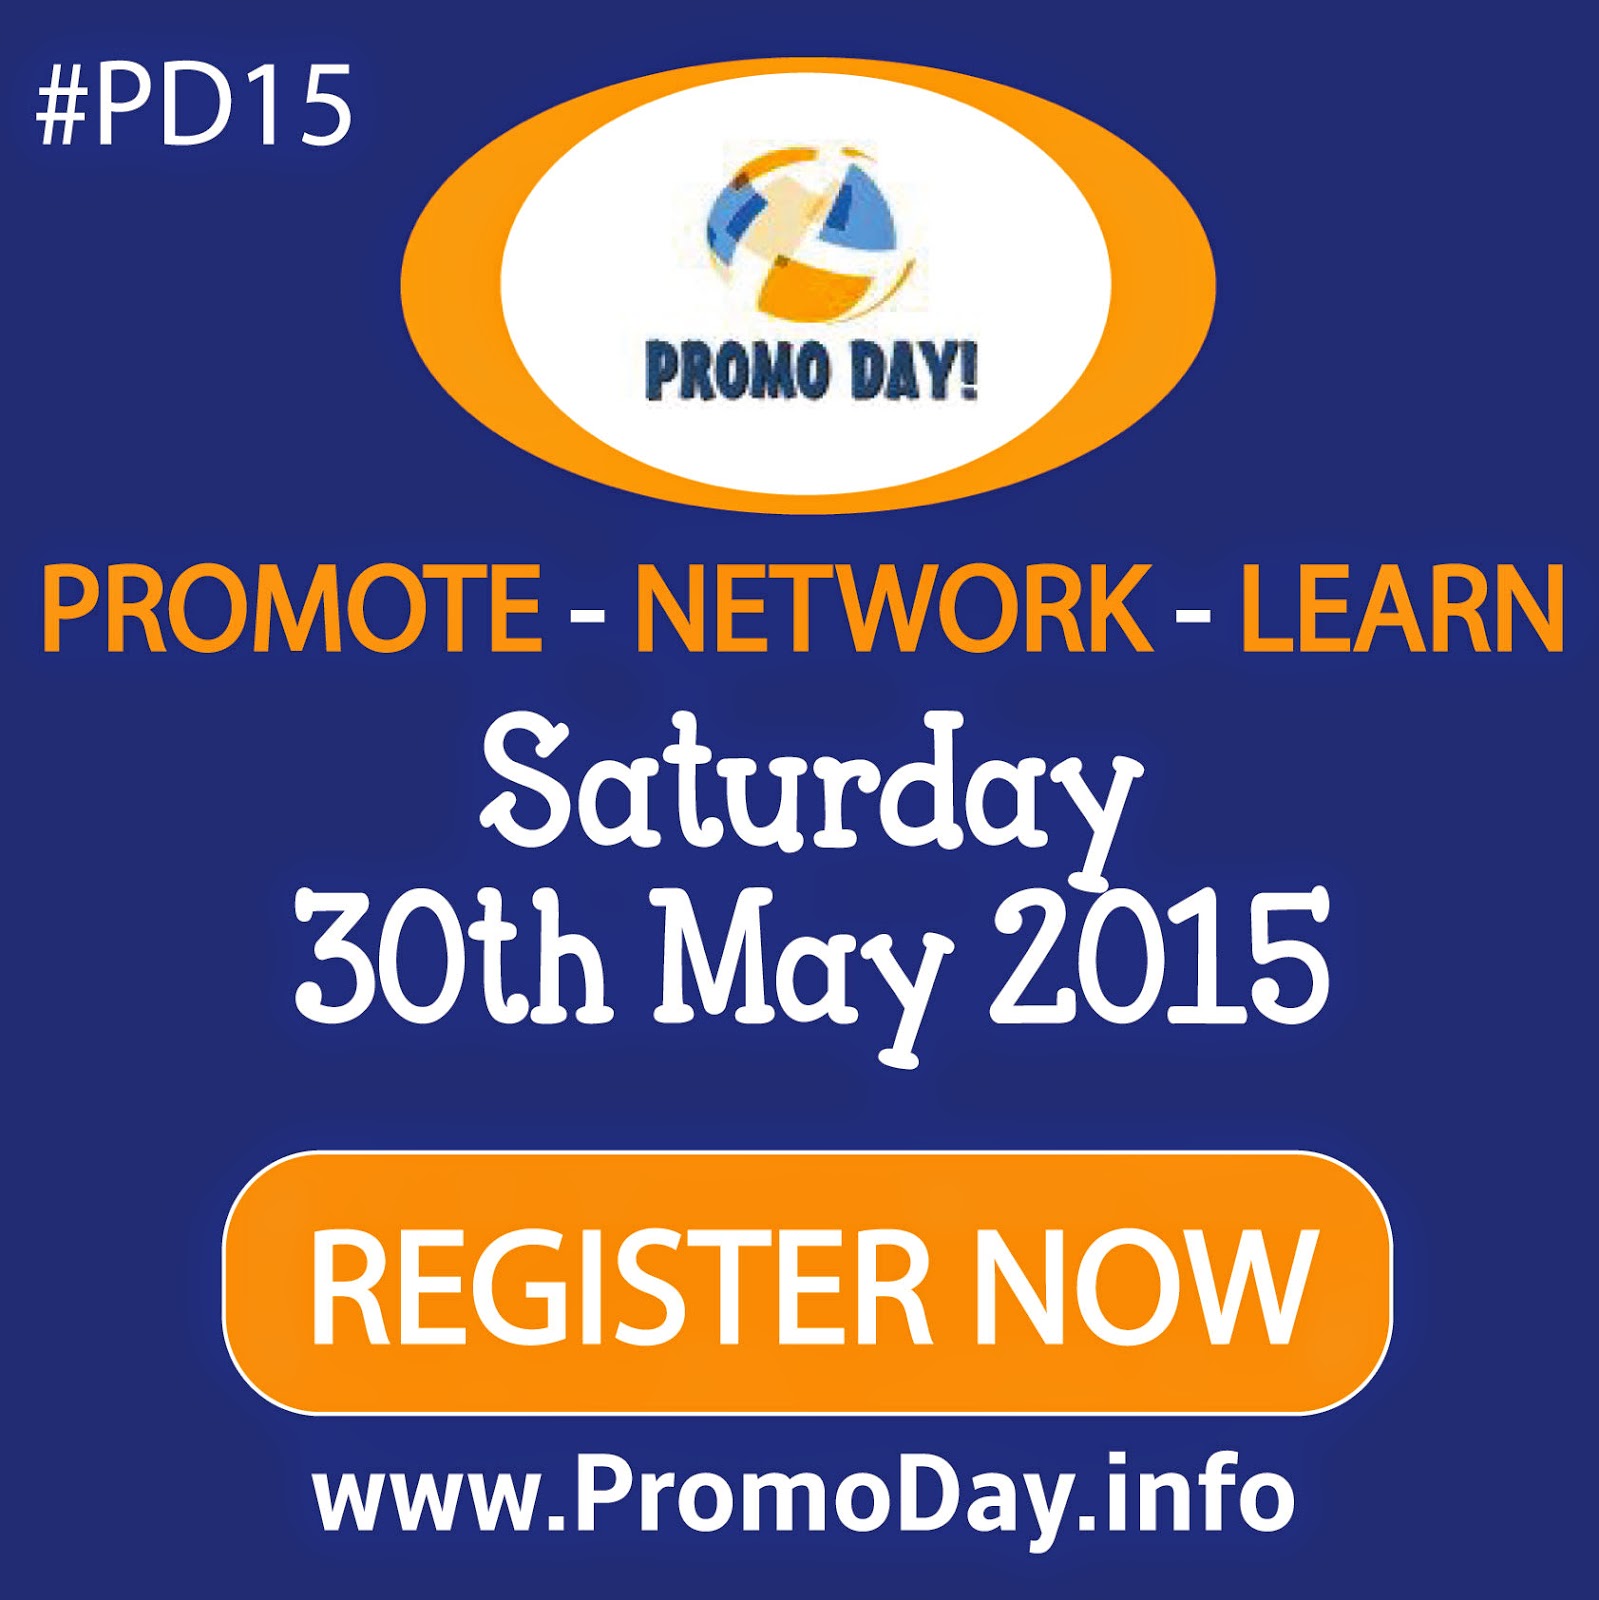 Register now for #PD15 at www.PromoDay.info. A whole day dedicated to promoting, networking, and learning. It's completely free too! 